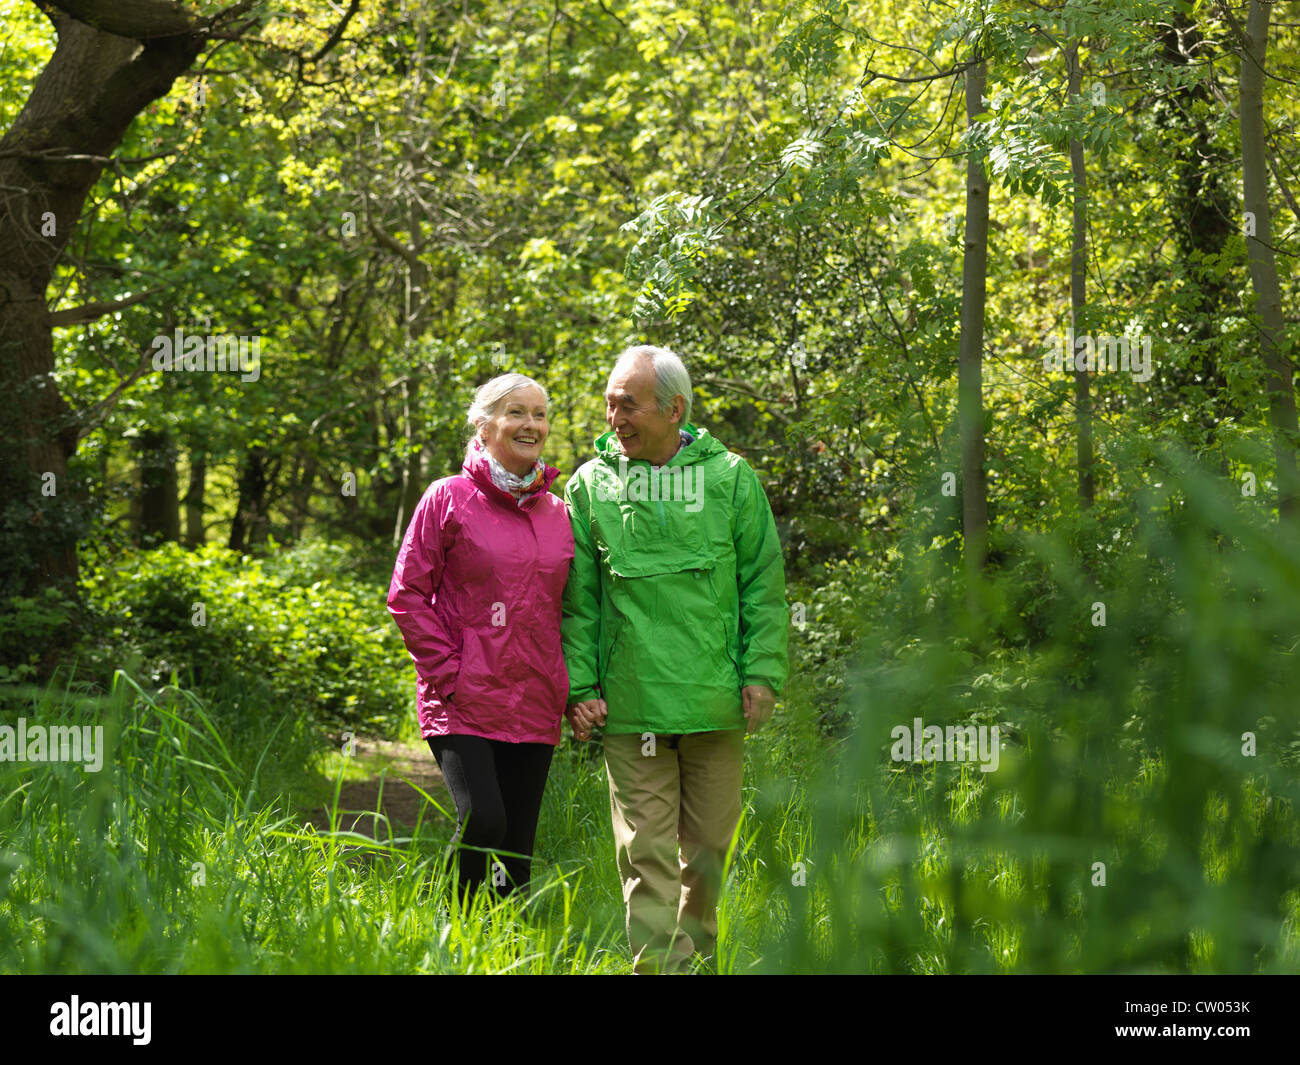 Older couple walking in forest together Stock Photo